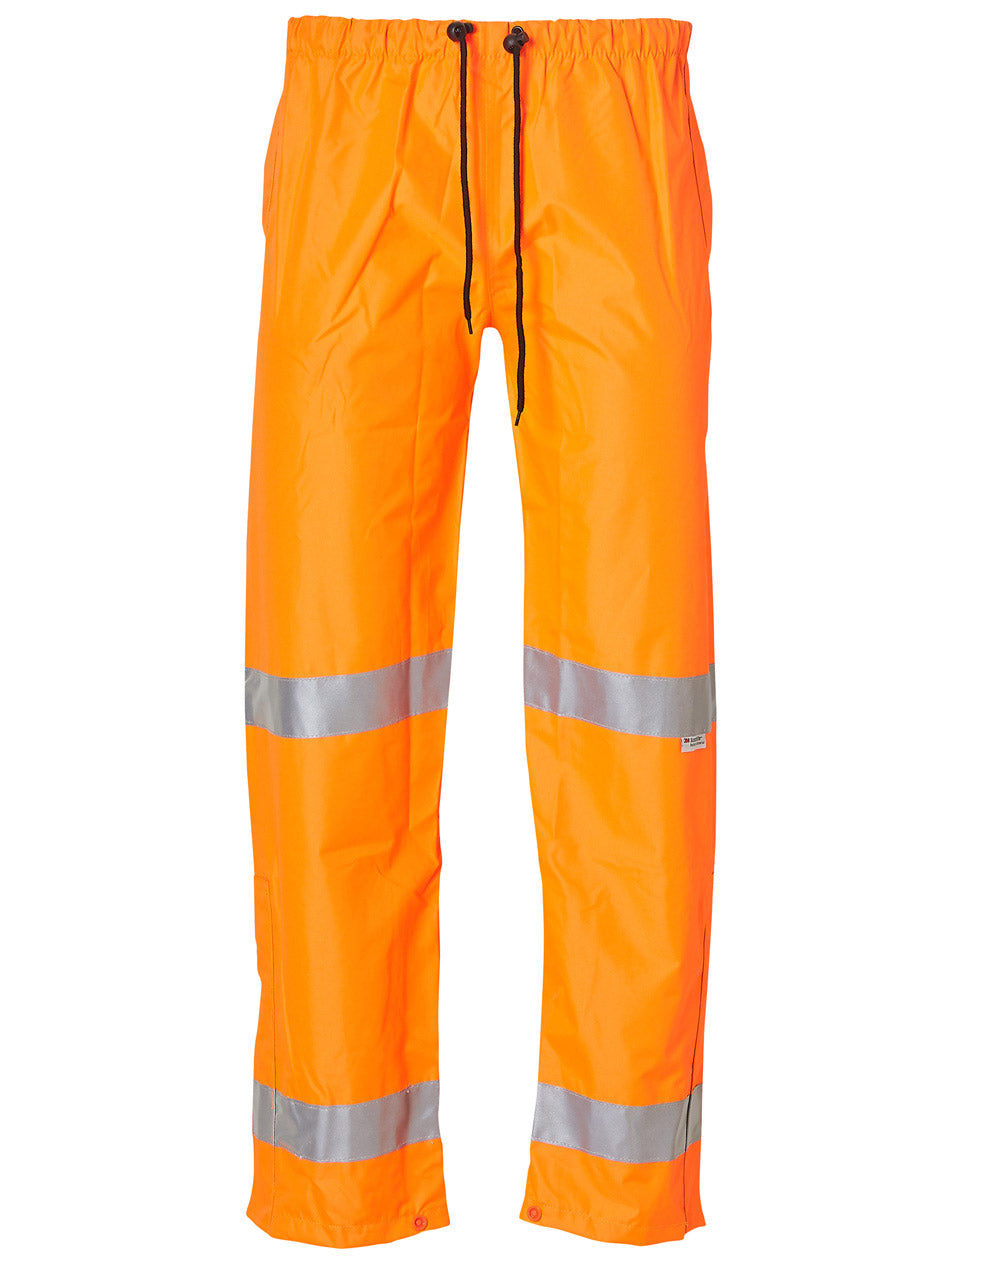 [HP01A] Hi-Vis Safety Pant with 3M Tapes